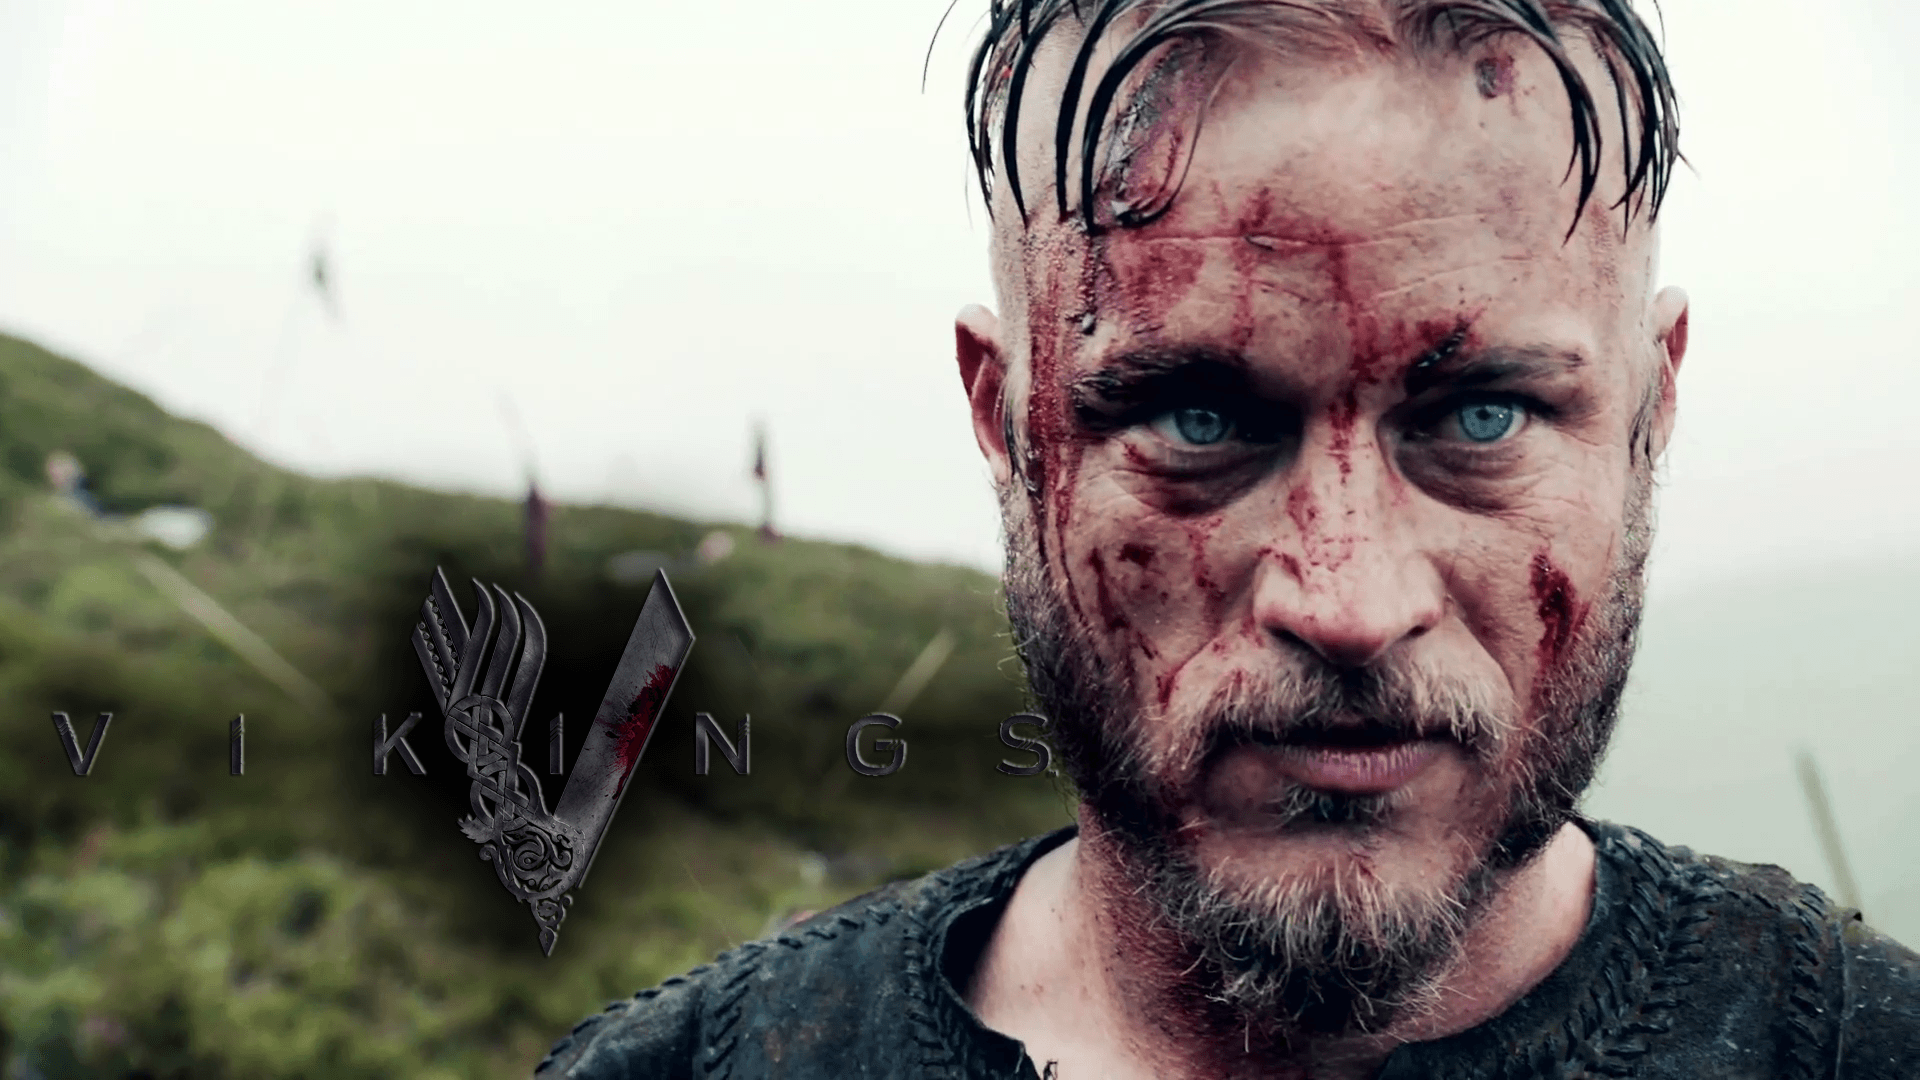 Vikings on History Channel this is Ragnar.Young Brad Pitt, amiright